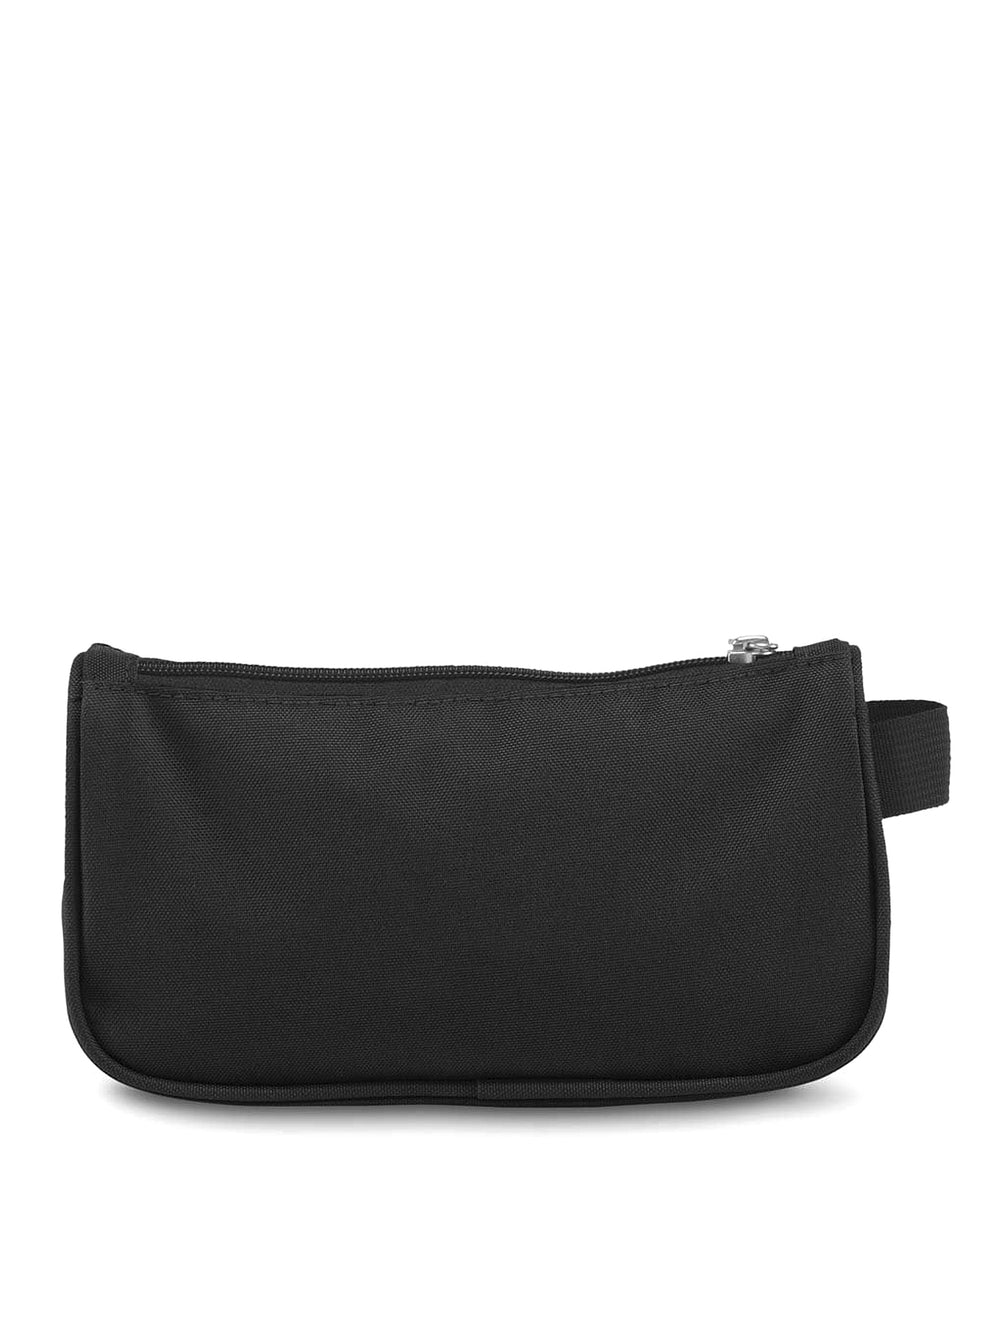 JANSPORT MED ACCESSORY POUCH